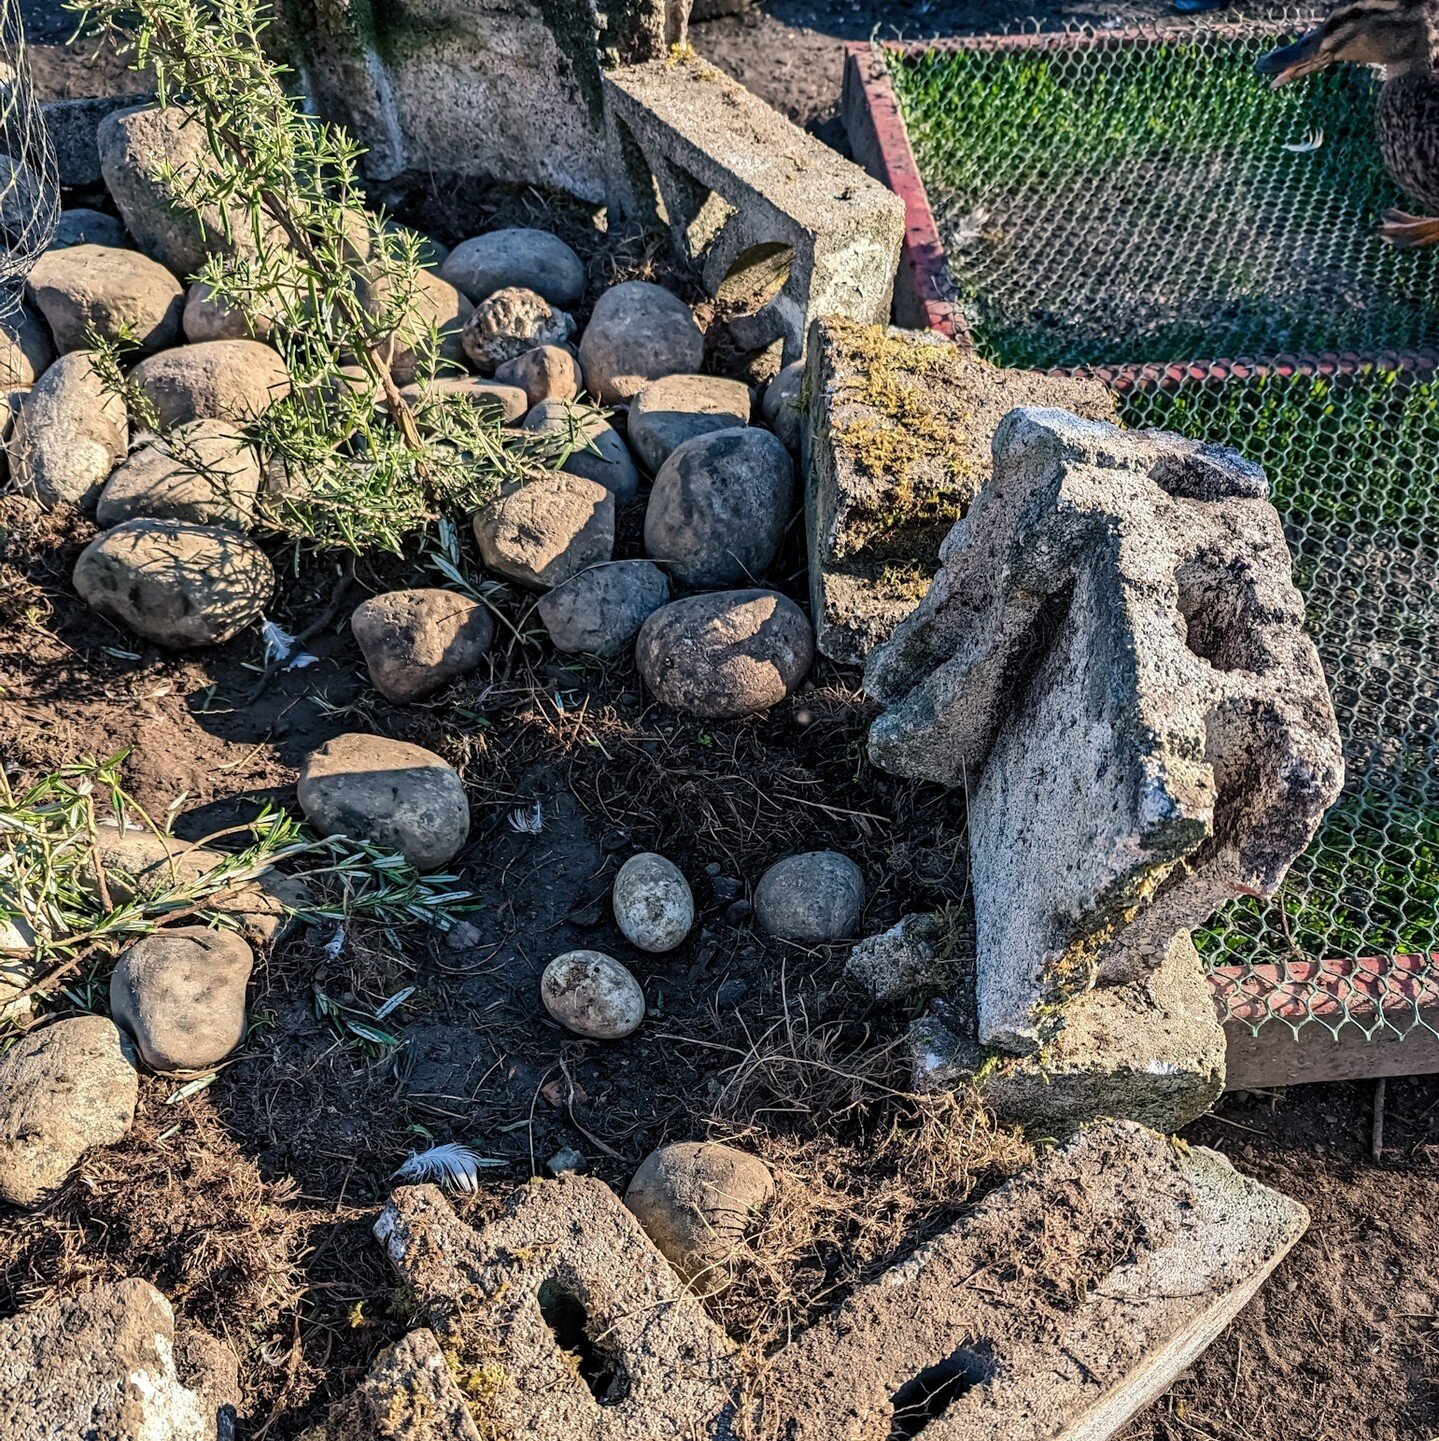 🎵 Two of these rocks are not like the others 🎵⁠
⁠
Sarah and Mack made adorable little rock gardens for the ducks to give them some greenery that they wouldn't eat (trialing a bunch of plants that are non-toxic but non-appetizing to waterfowl).⁠
⁠
T